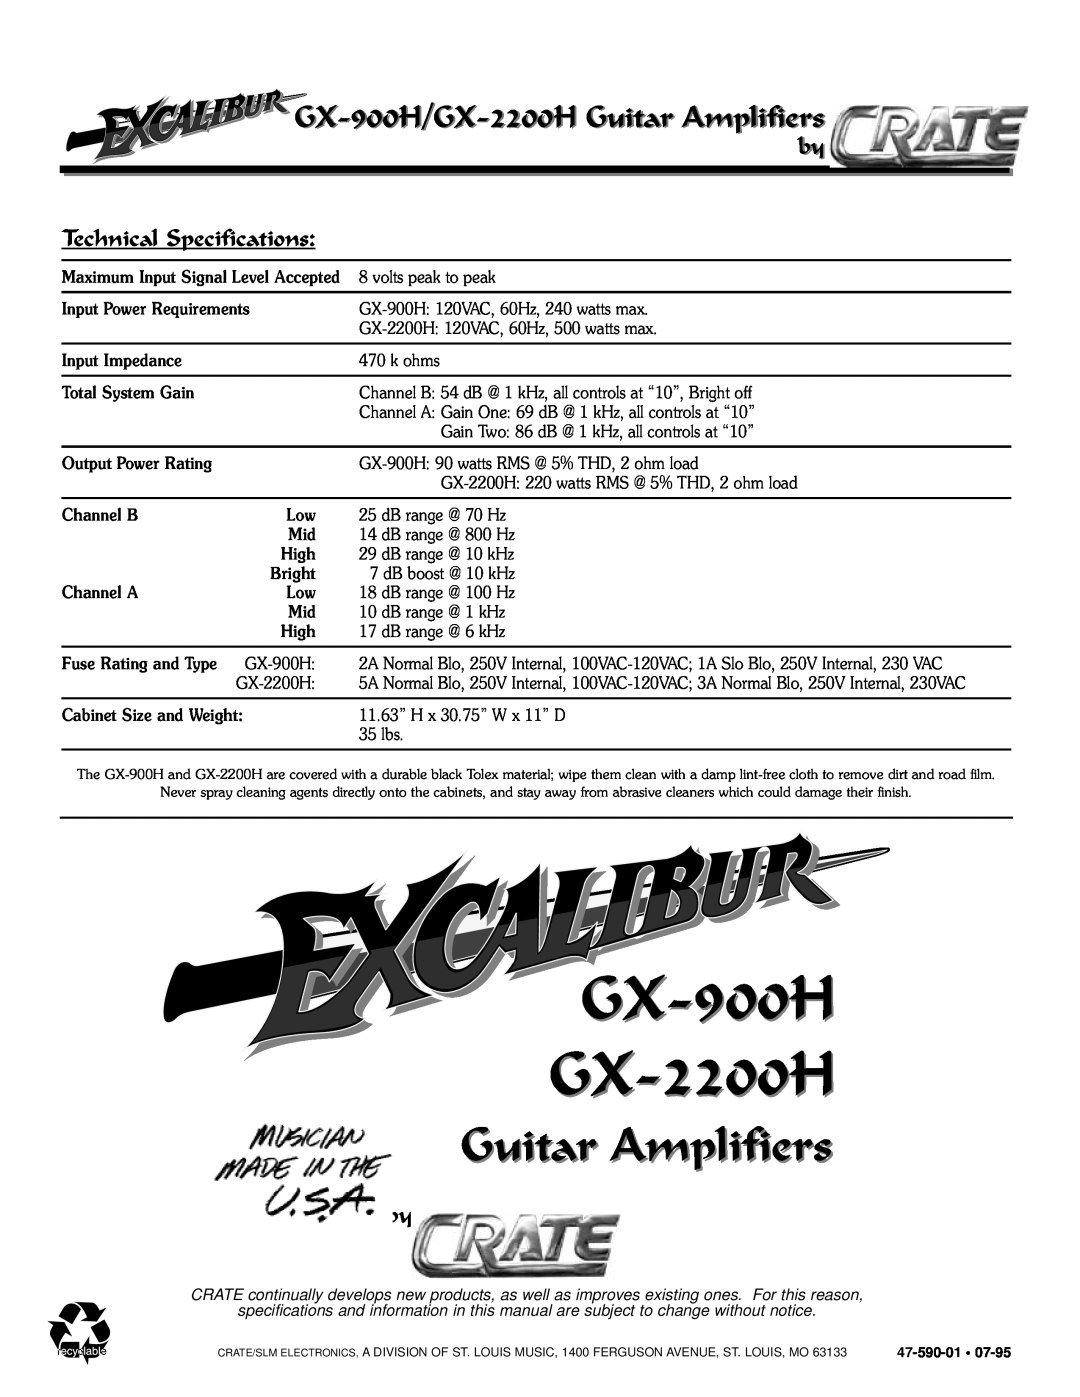 Crate Amplifiers owner manual by Technical Specifications, GX-900H GX-2200H, GX-900H/GX-2200H Guitar Amplifiers 